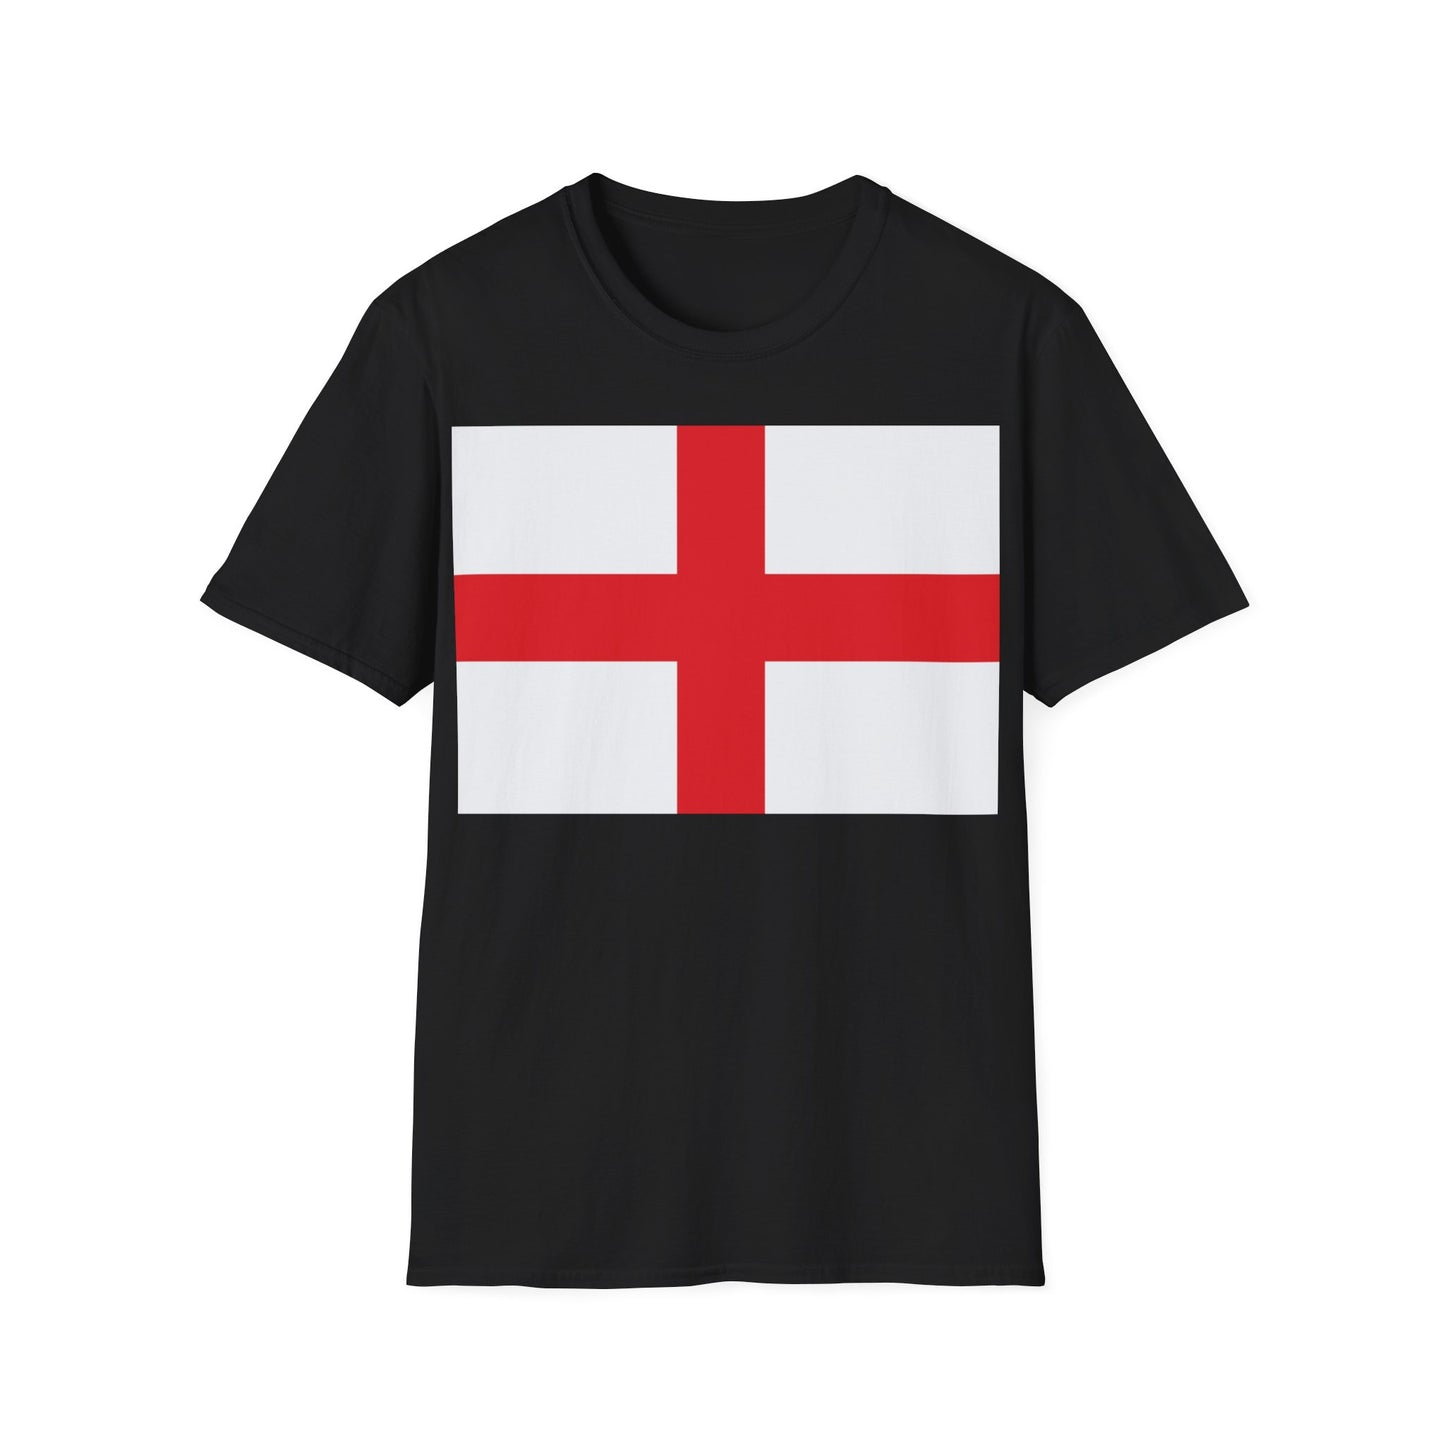 A black t-shirt with a design of the classic England flag of Saint George. A striking design of the red cross on a white background